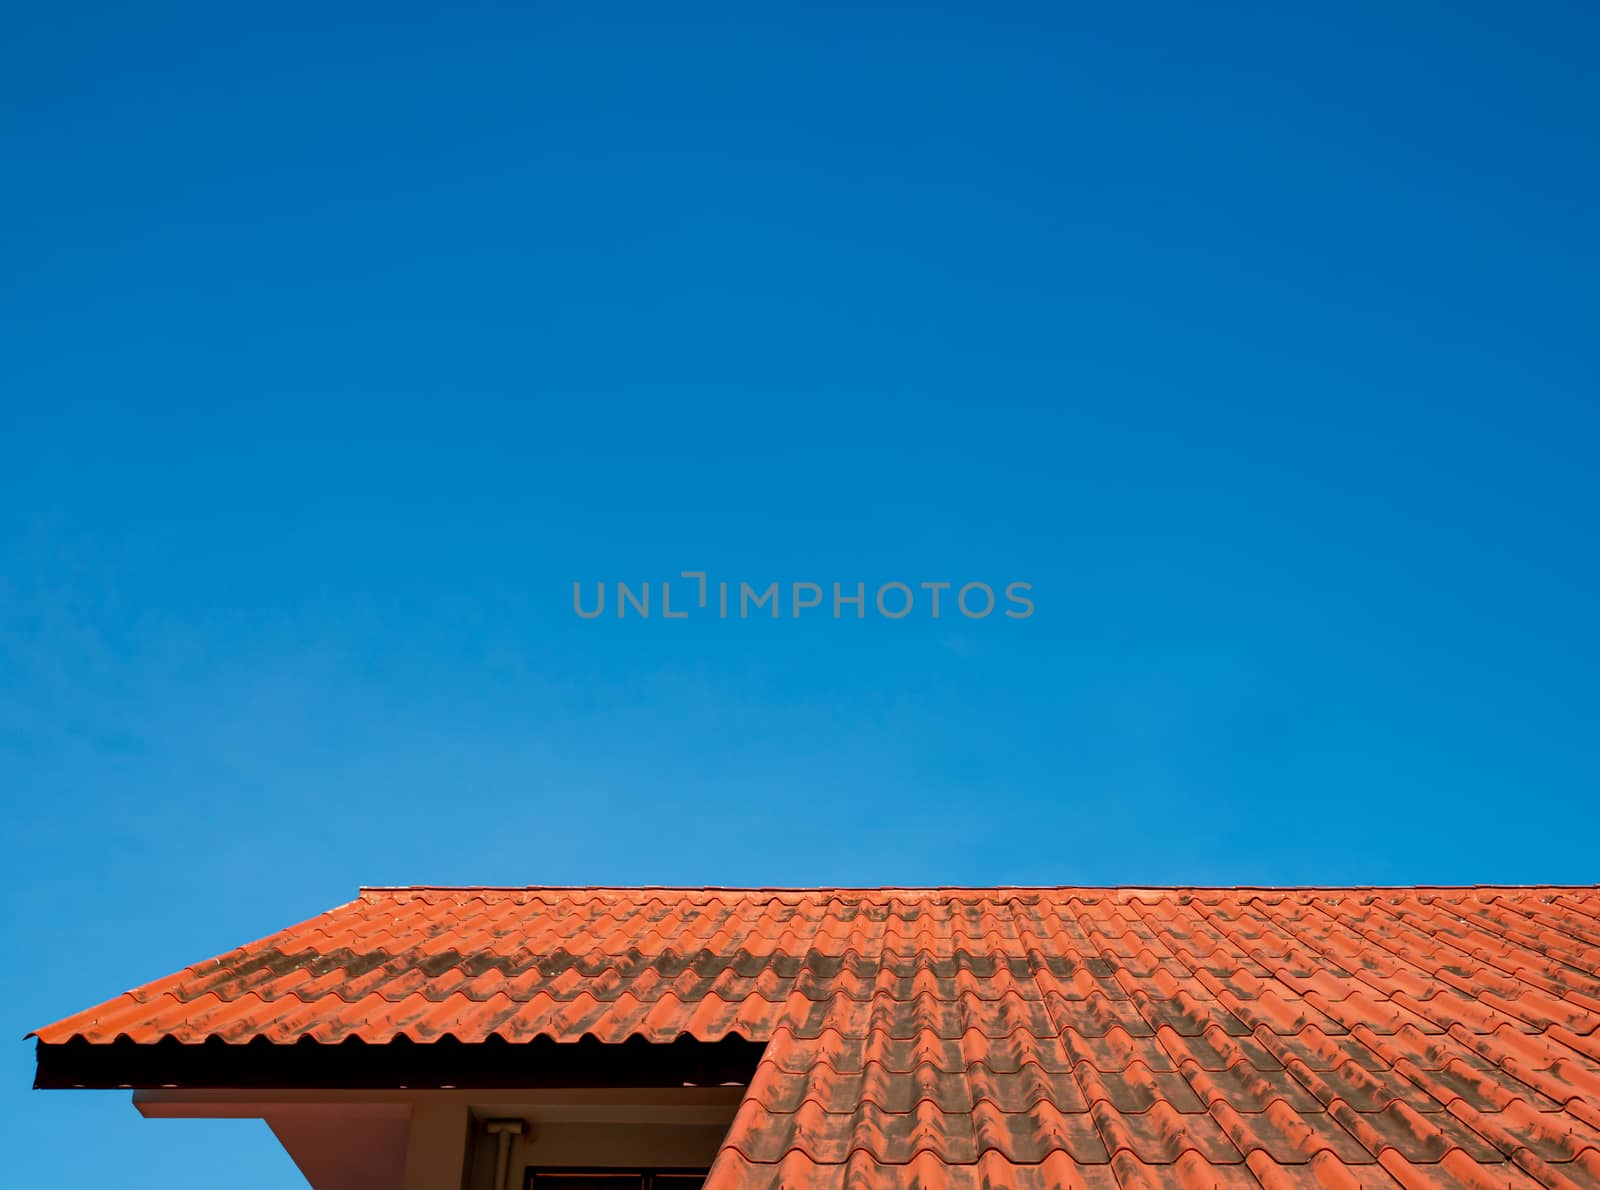 The roof tiles of the building have a background of blue skies of bright sky.